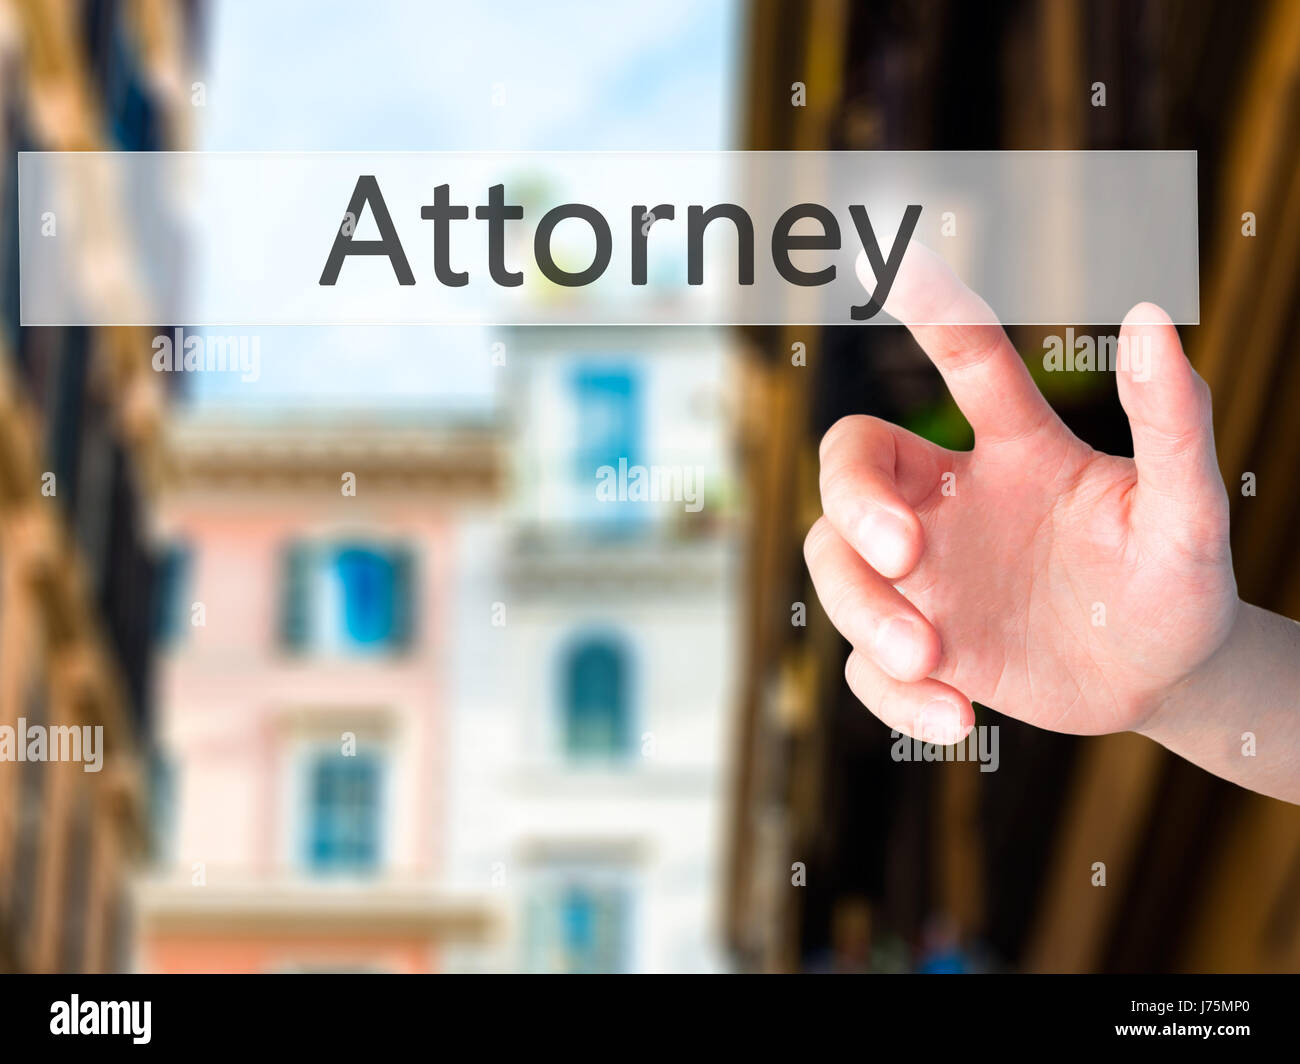 Attorney - Hand pressing a button on blurred background concept . Business, technology, internet concept. Stock Photo Stock Photo